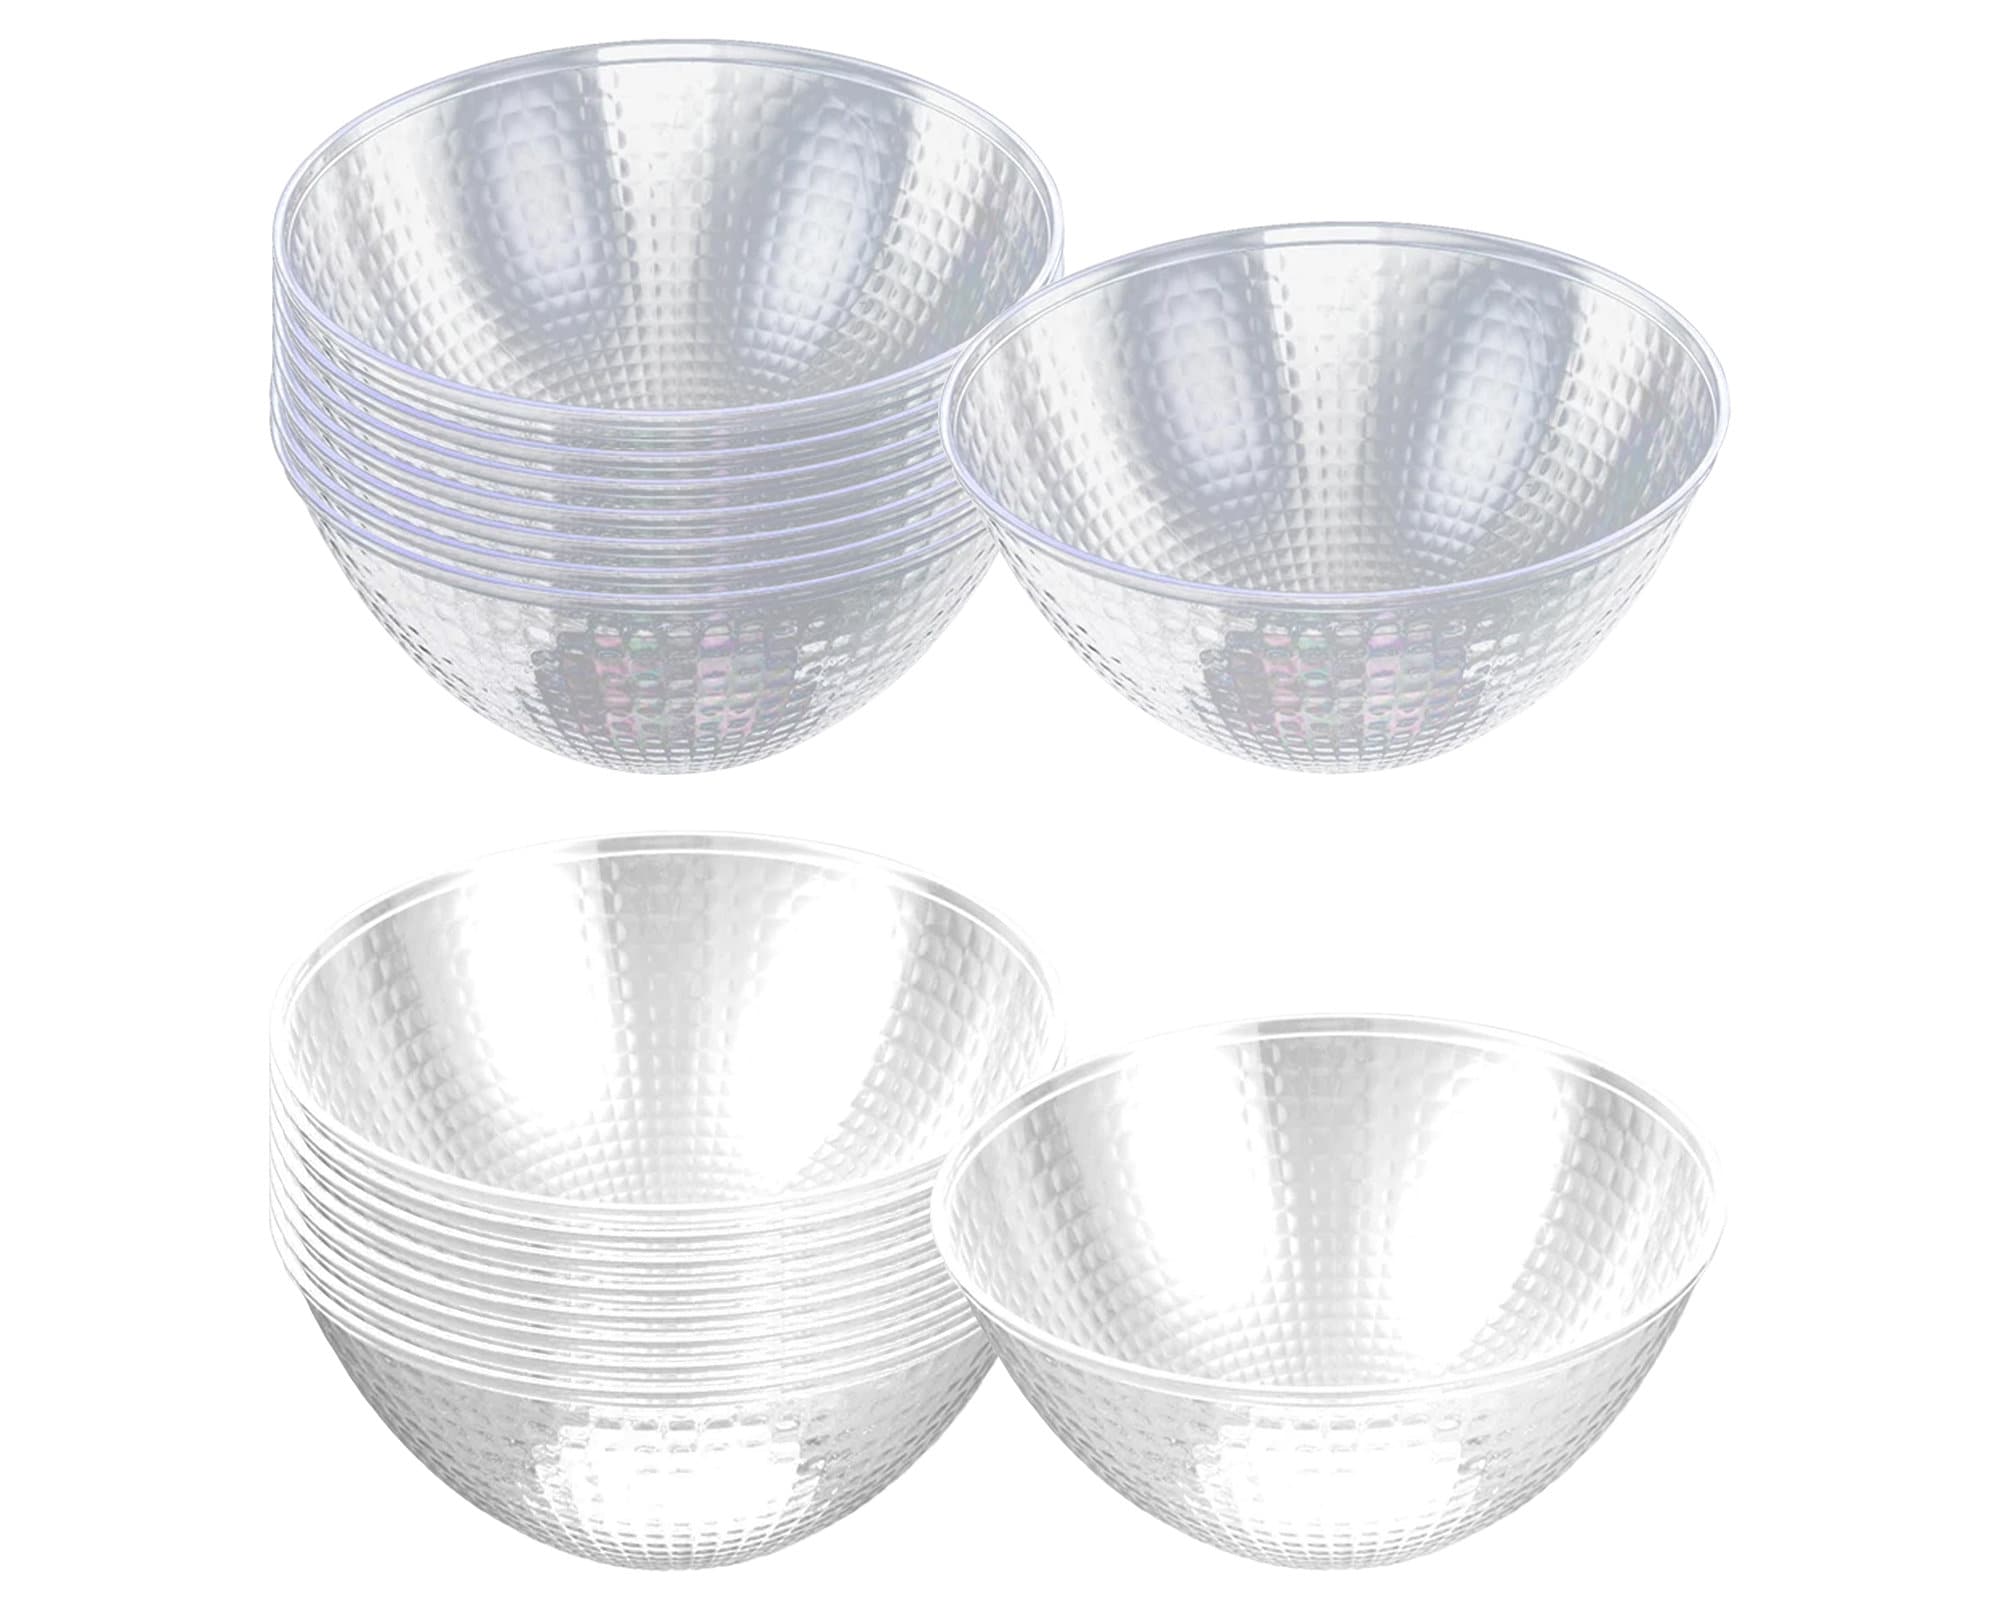 64oz Crystal Clear Plastic Disposable Salad Bowls with Lids To-Go with –  EcoQuality Store